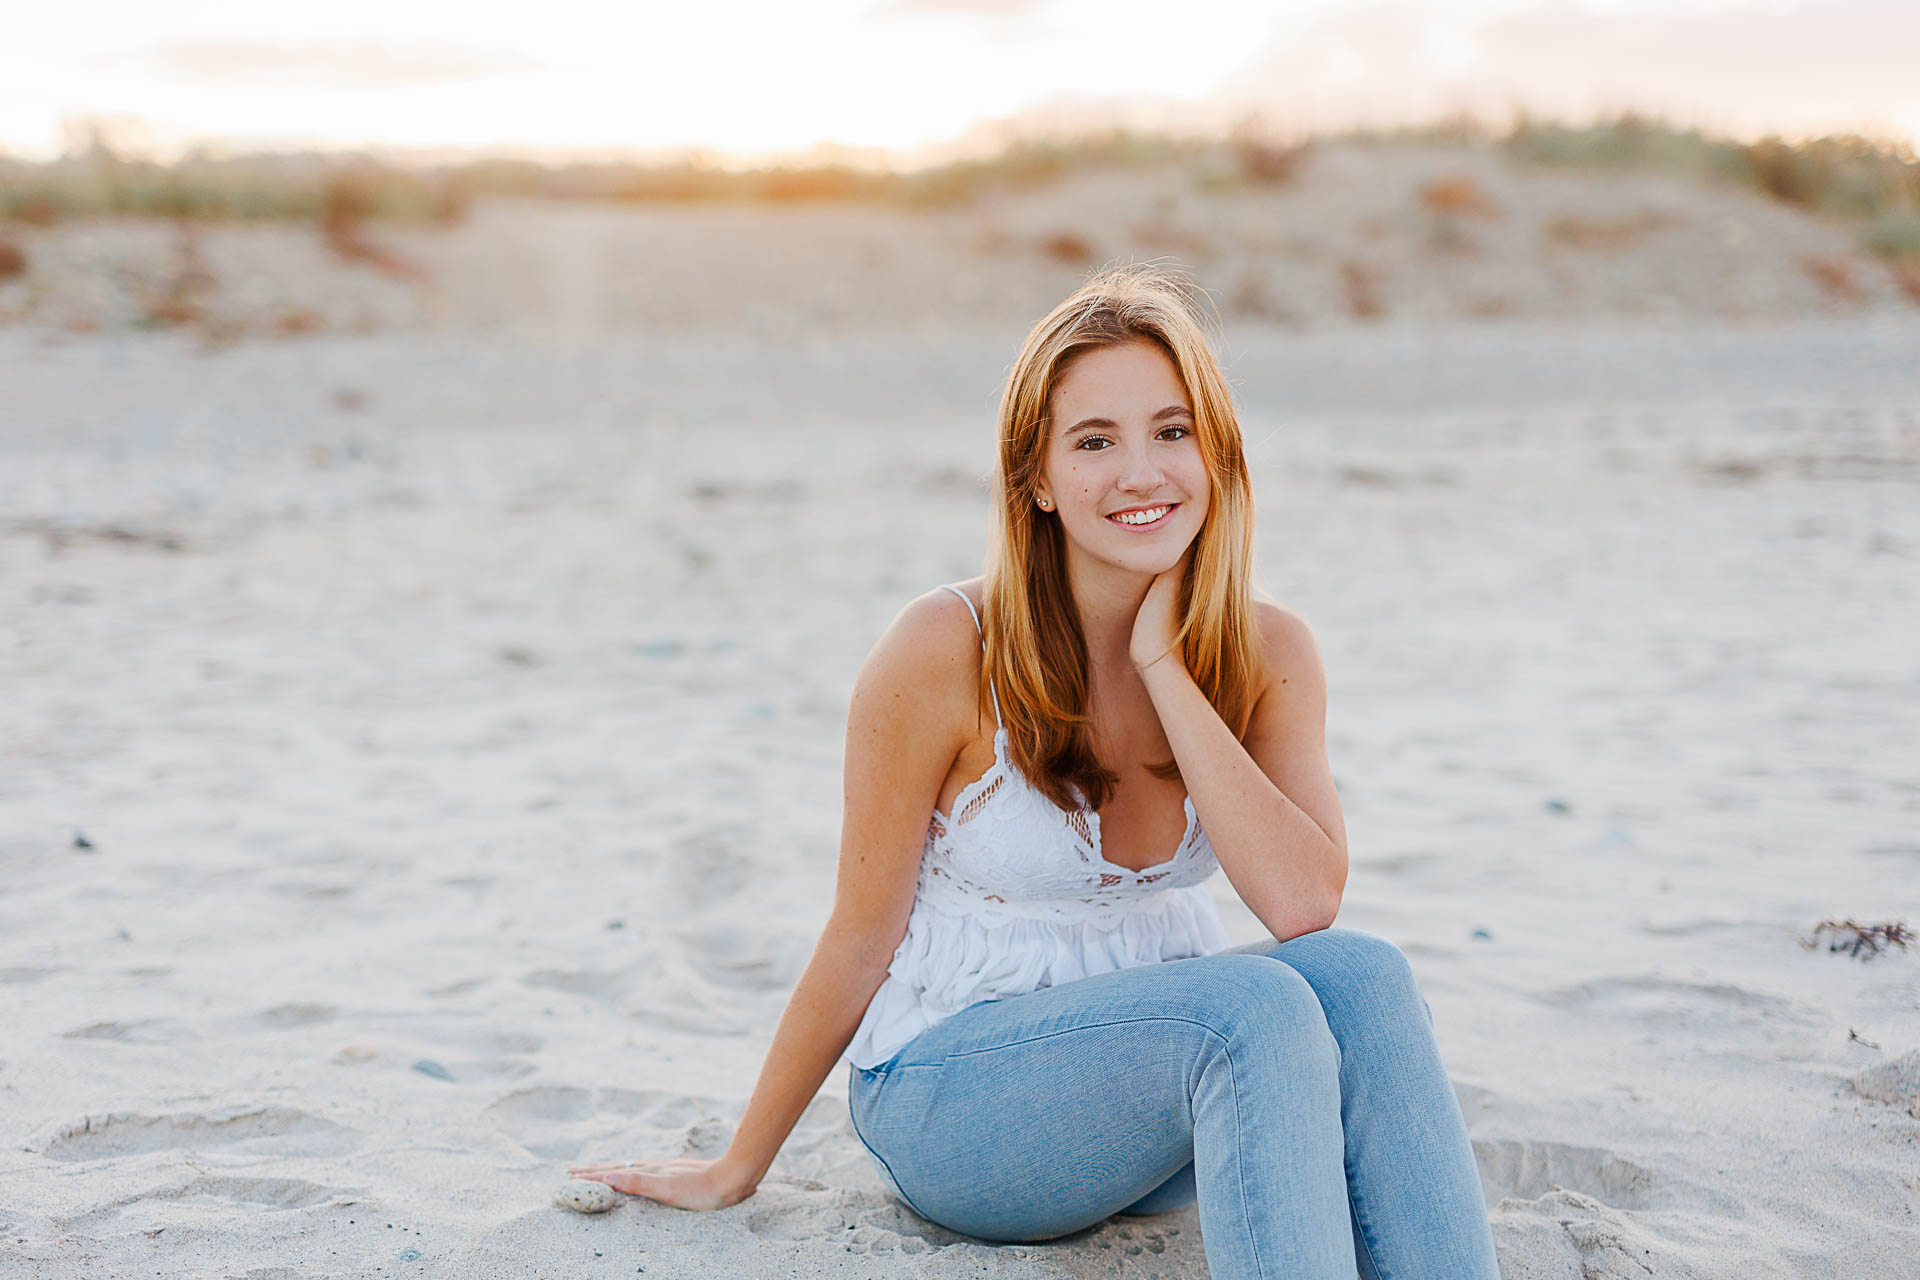 Cohasset Senior Portraits by Christina Runnals Photographer | Girl sitting in the sand at the beach